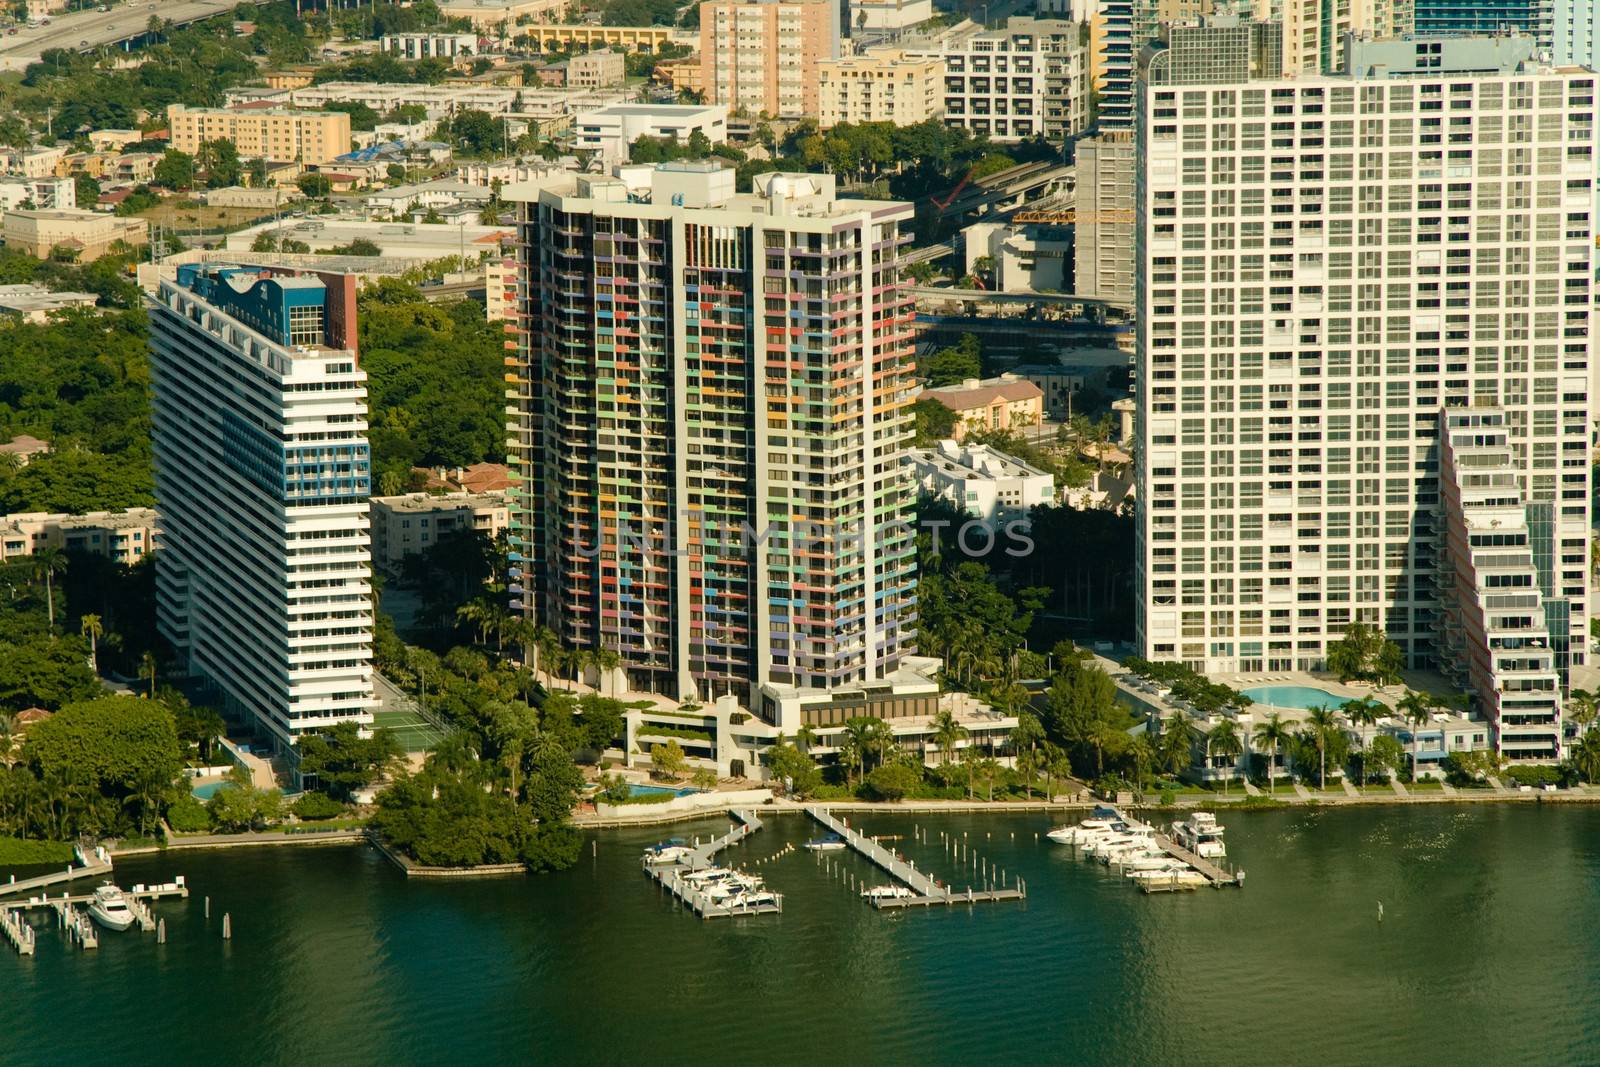 Apartment buildings in Miami by CelsoDiniz